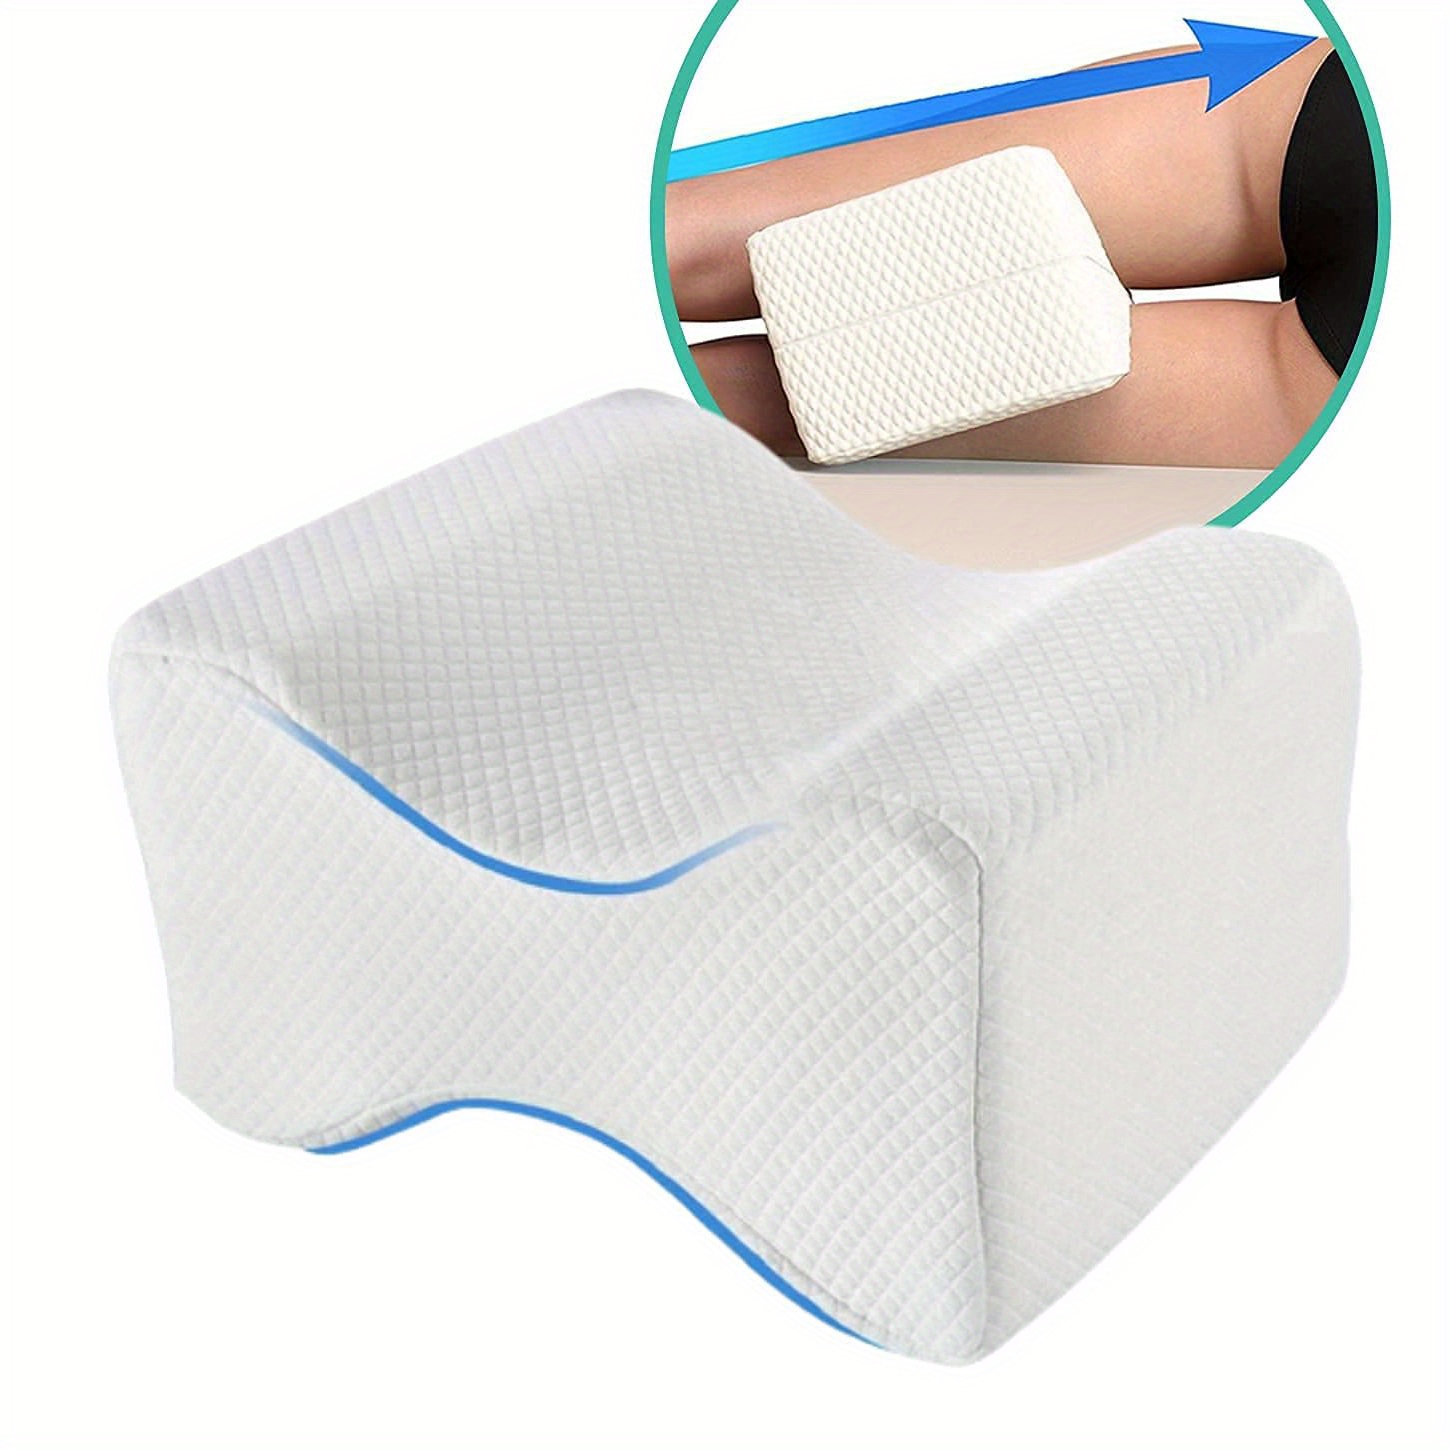  Knee Pillow for Side Sleepers - 100% Memory Foam Wedge Contour  - Leg Pillows for Sleeping - Spacer Cushion for Spine Alignment, Back Pain,  Pregnancy Support (White) : Home & Kitchen